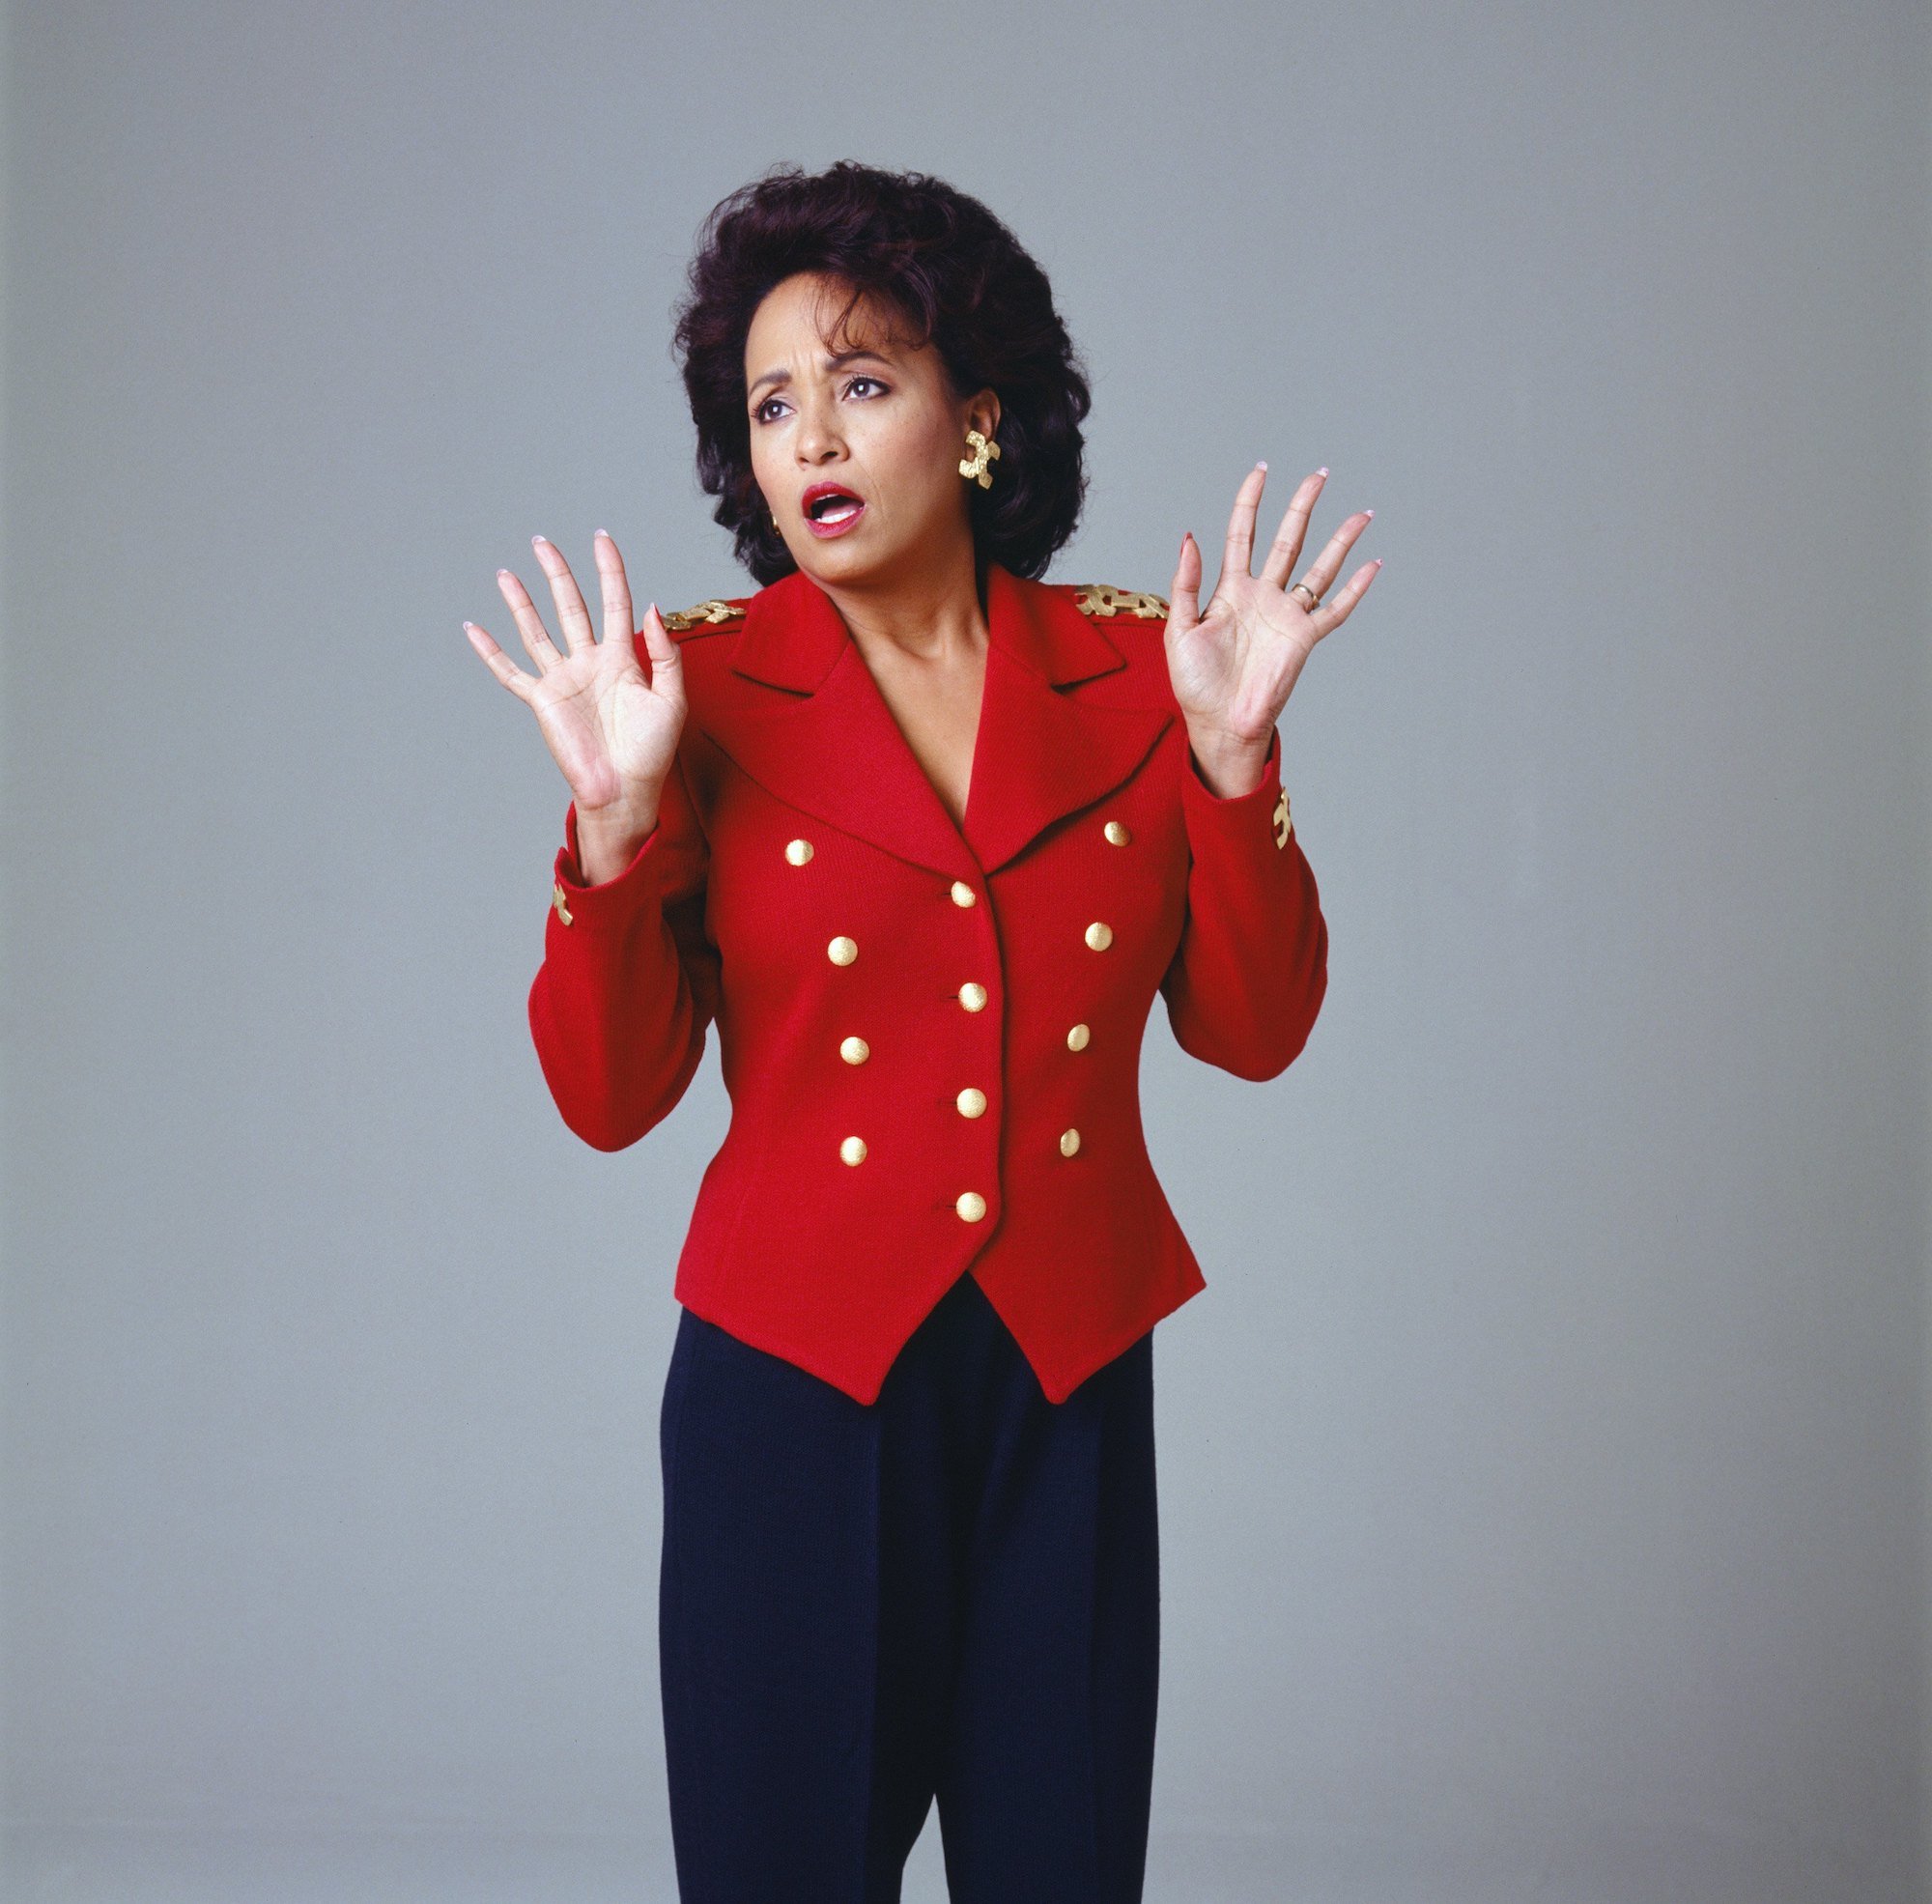 Daphne Reid as Vivian Banks in front of a gray background, holding up her hands